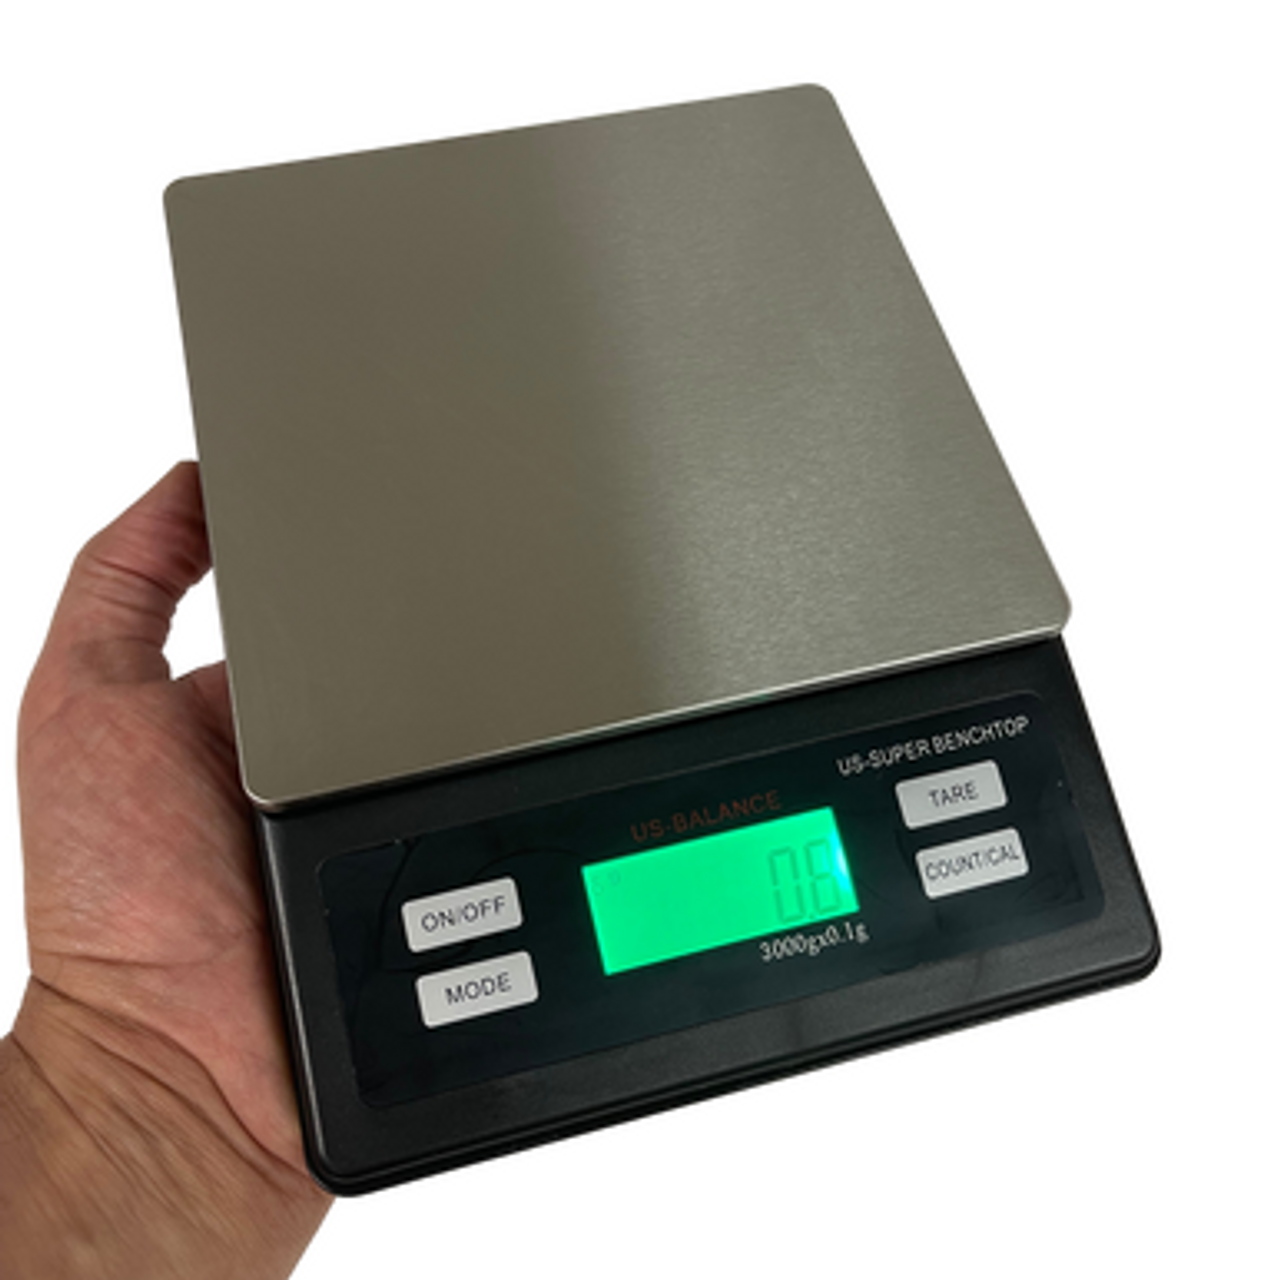 High Capacity Digital Electronic Scales for Weighing Resin - GlassCast